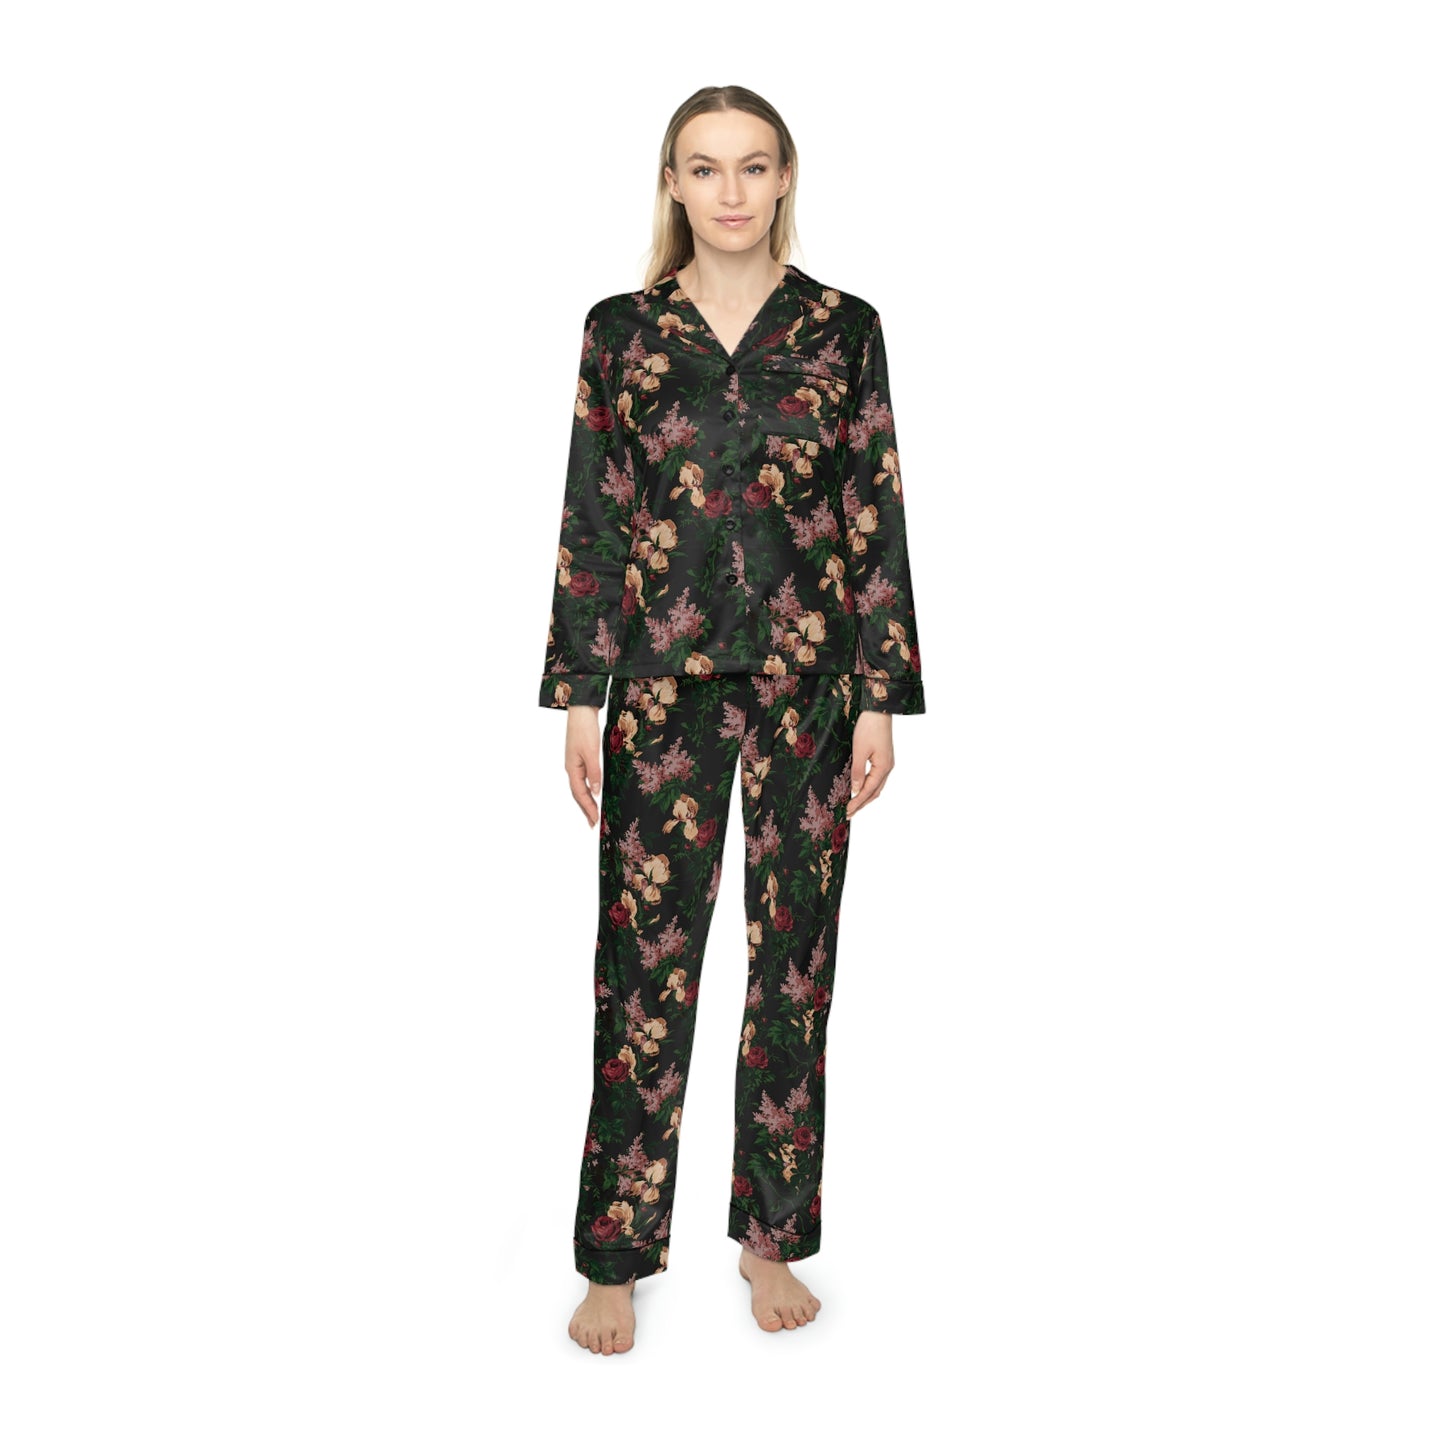 Pajama Game in Dark Bella Roses Satin 2 Piece Button Up PJ Set | Pinup Couture Relaxed